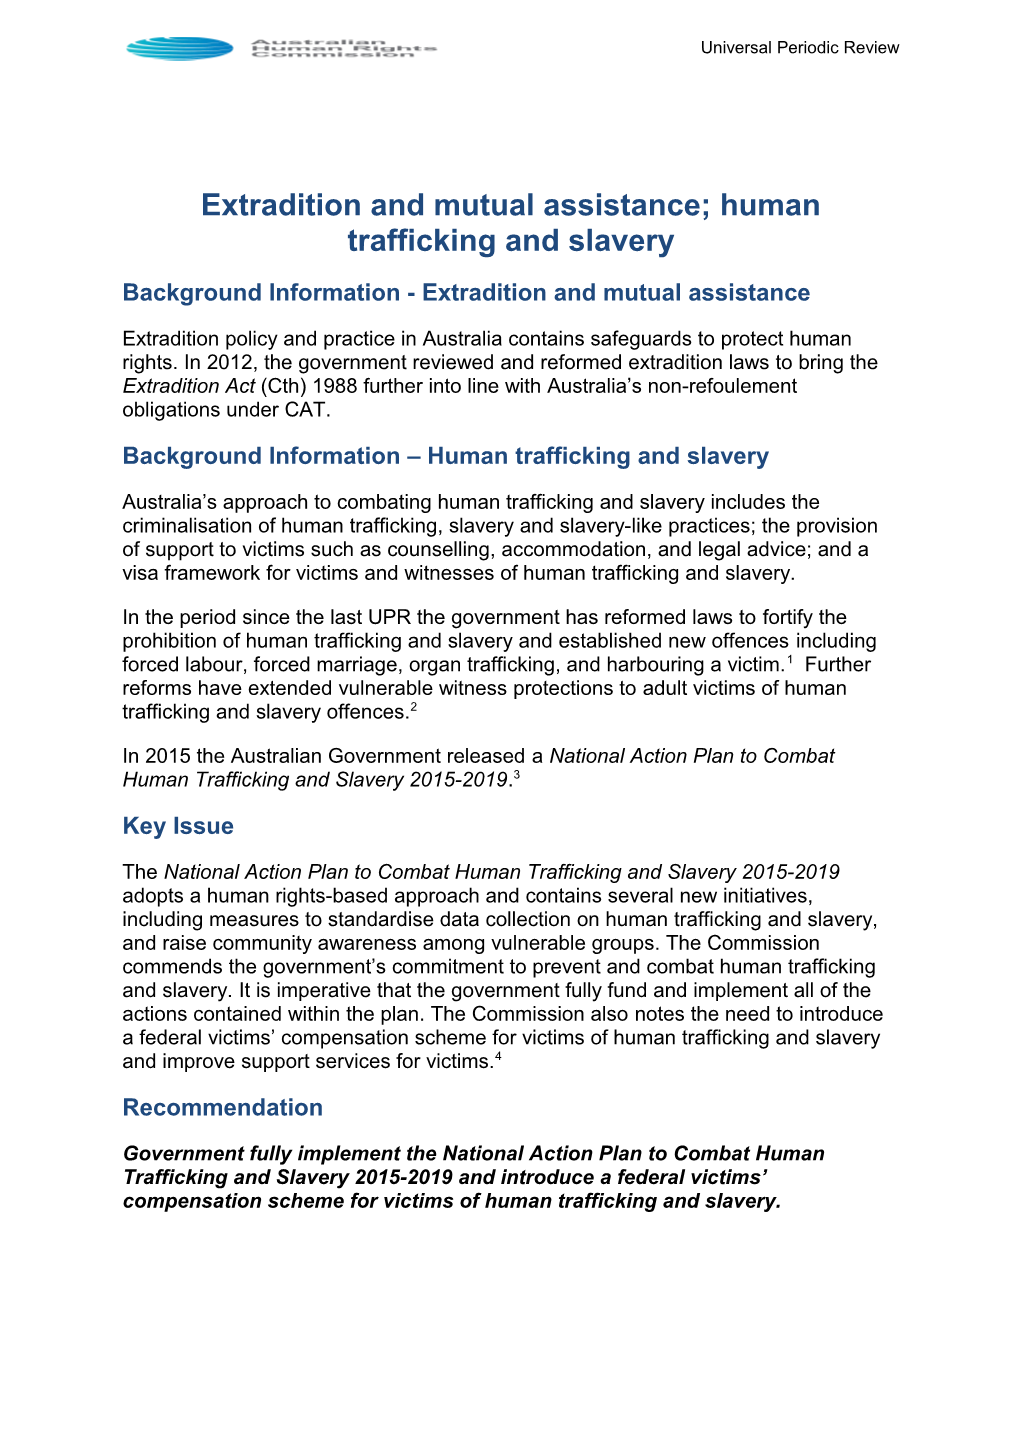 Extradition and Mutual Assistance;Human Trafficking and Slavery